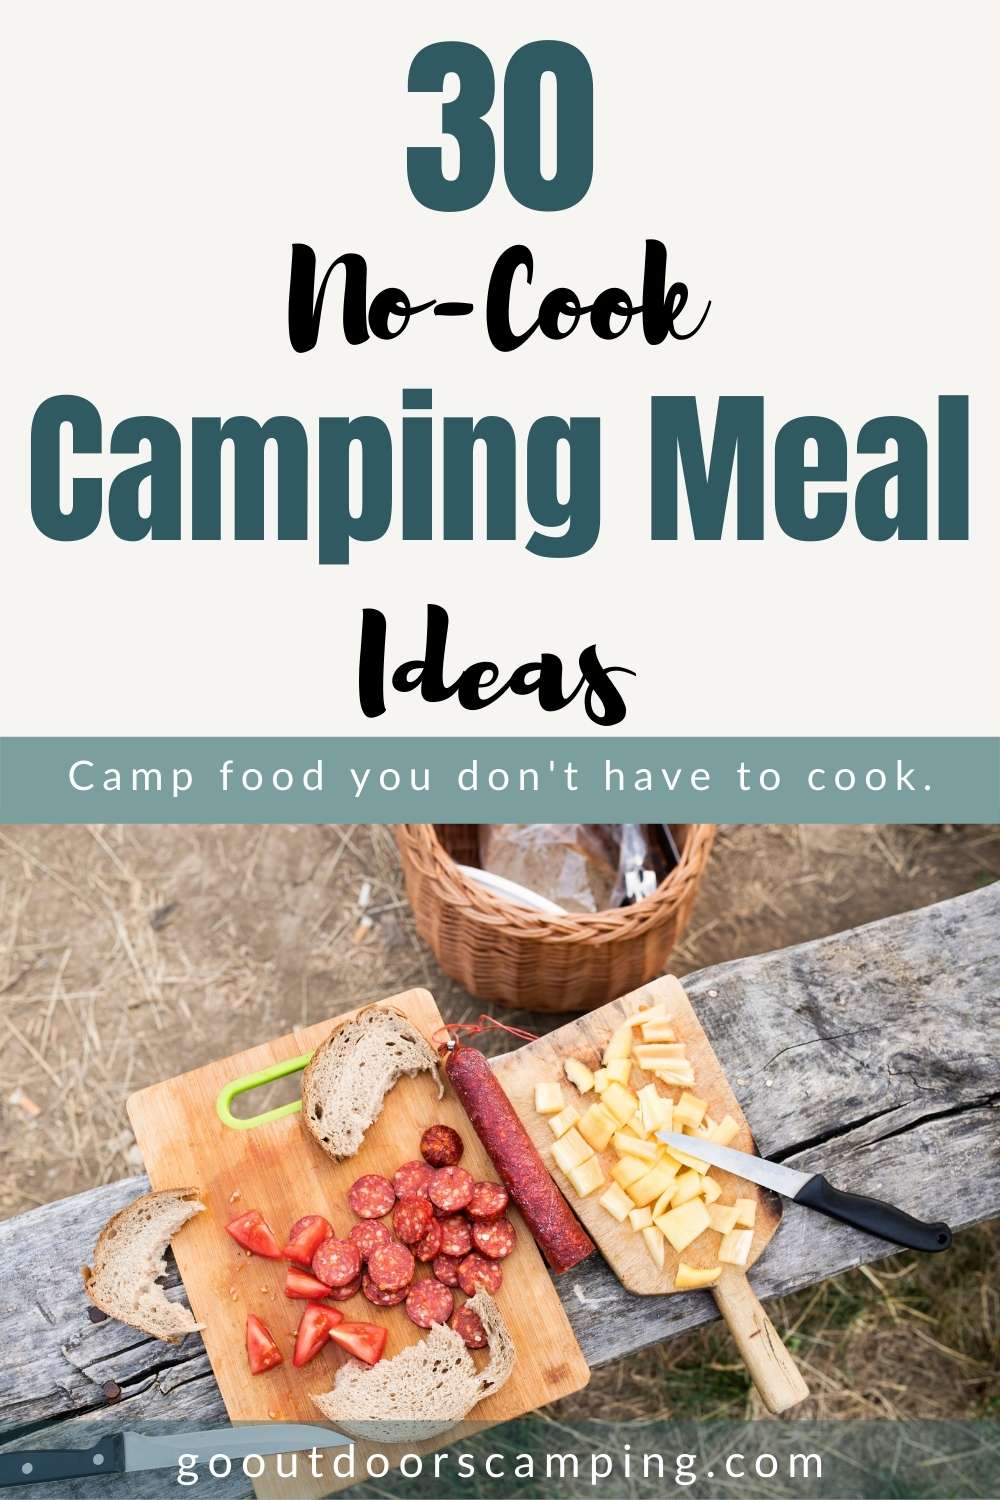 Let's Go Camping: Tried-&-True Outdoor Meal Ideas - The Mom Edit